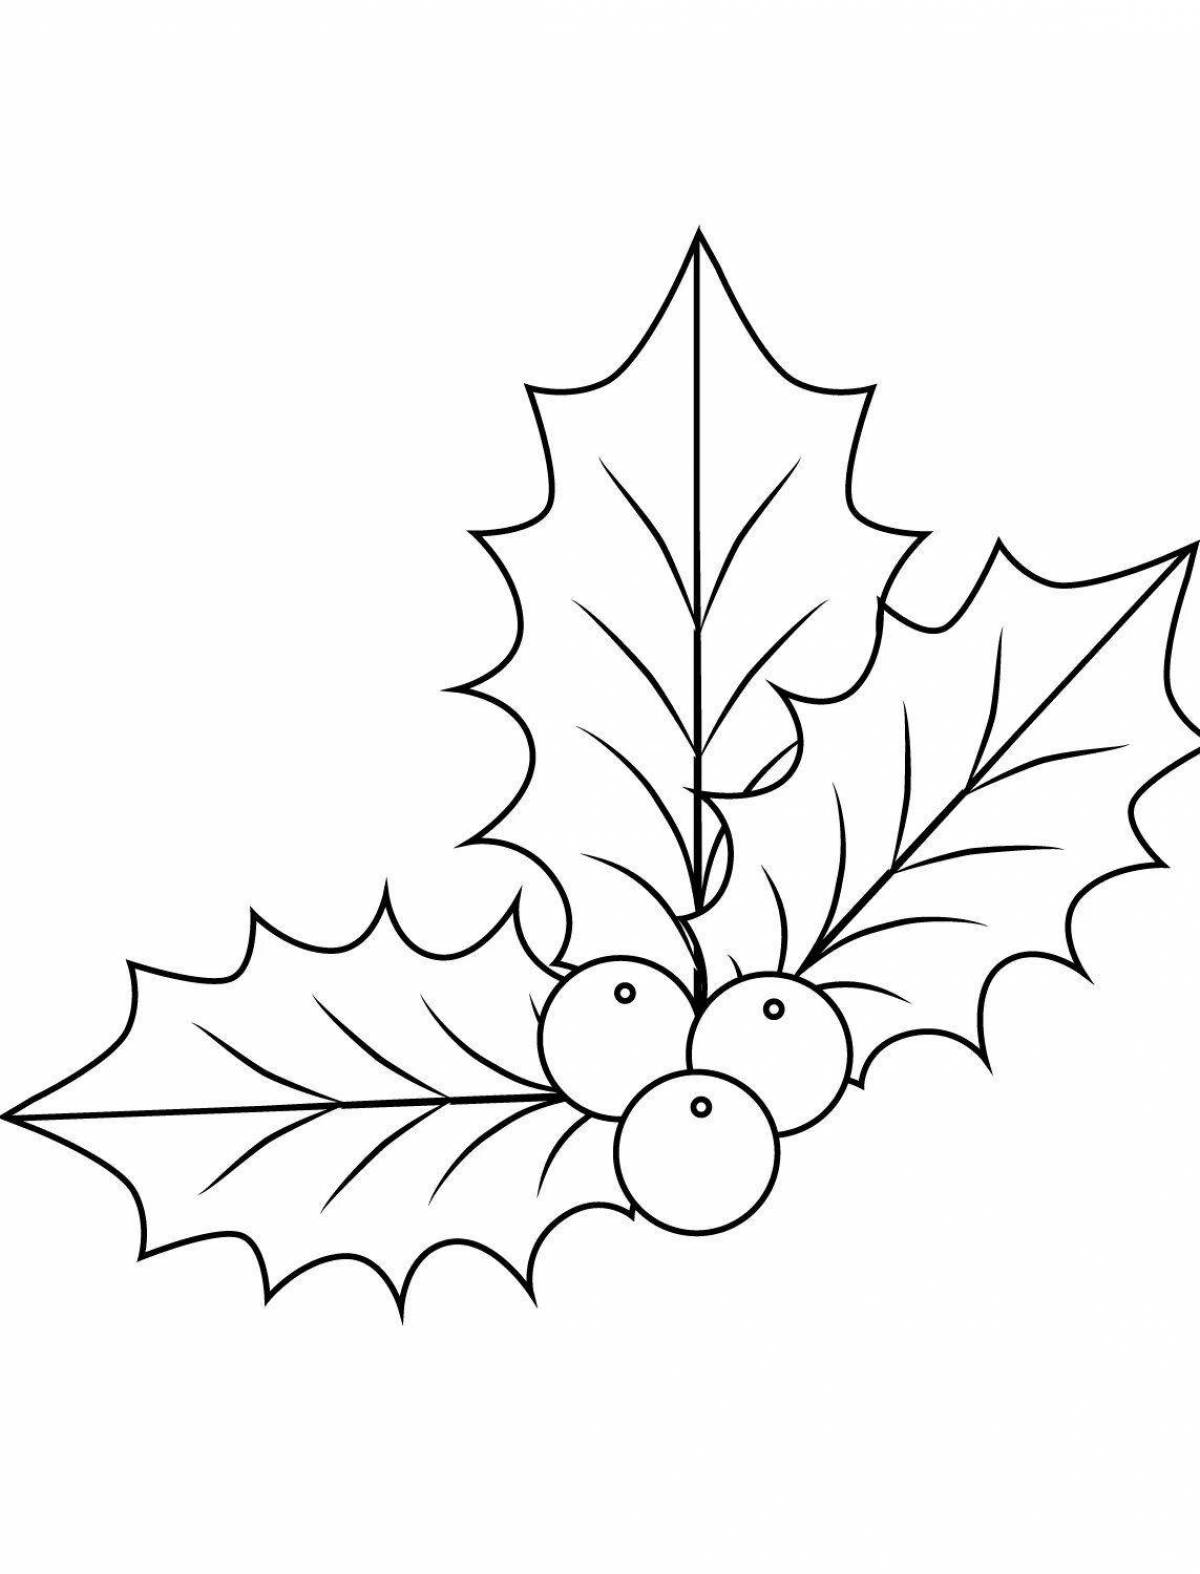 Amazing coloring pages Christmas flowers